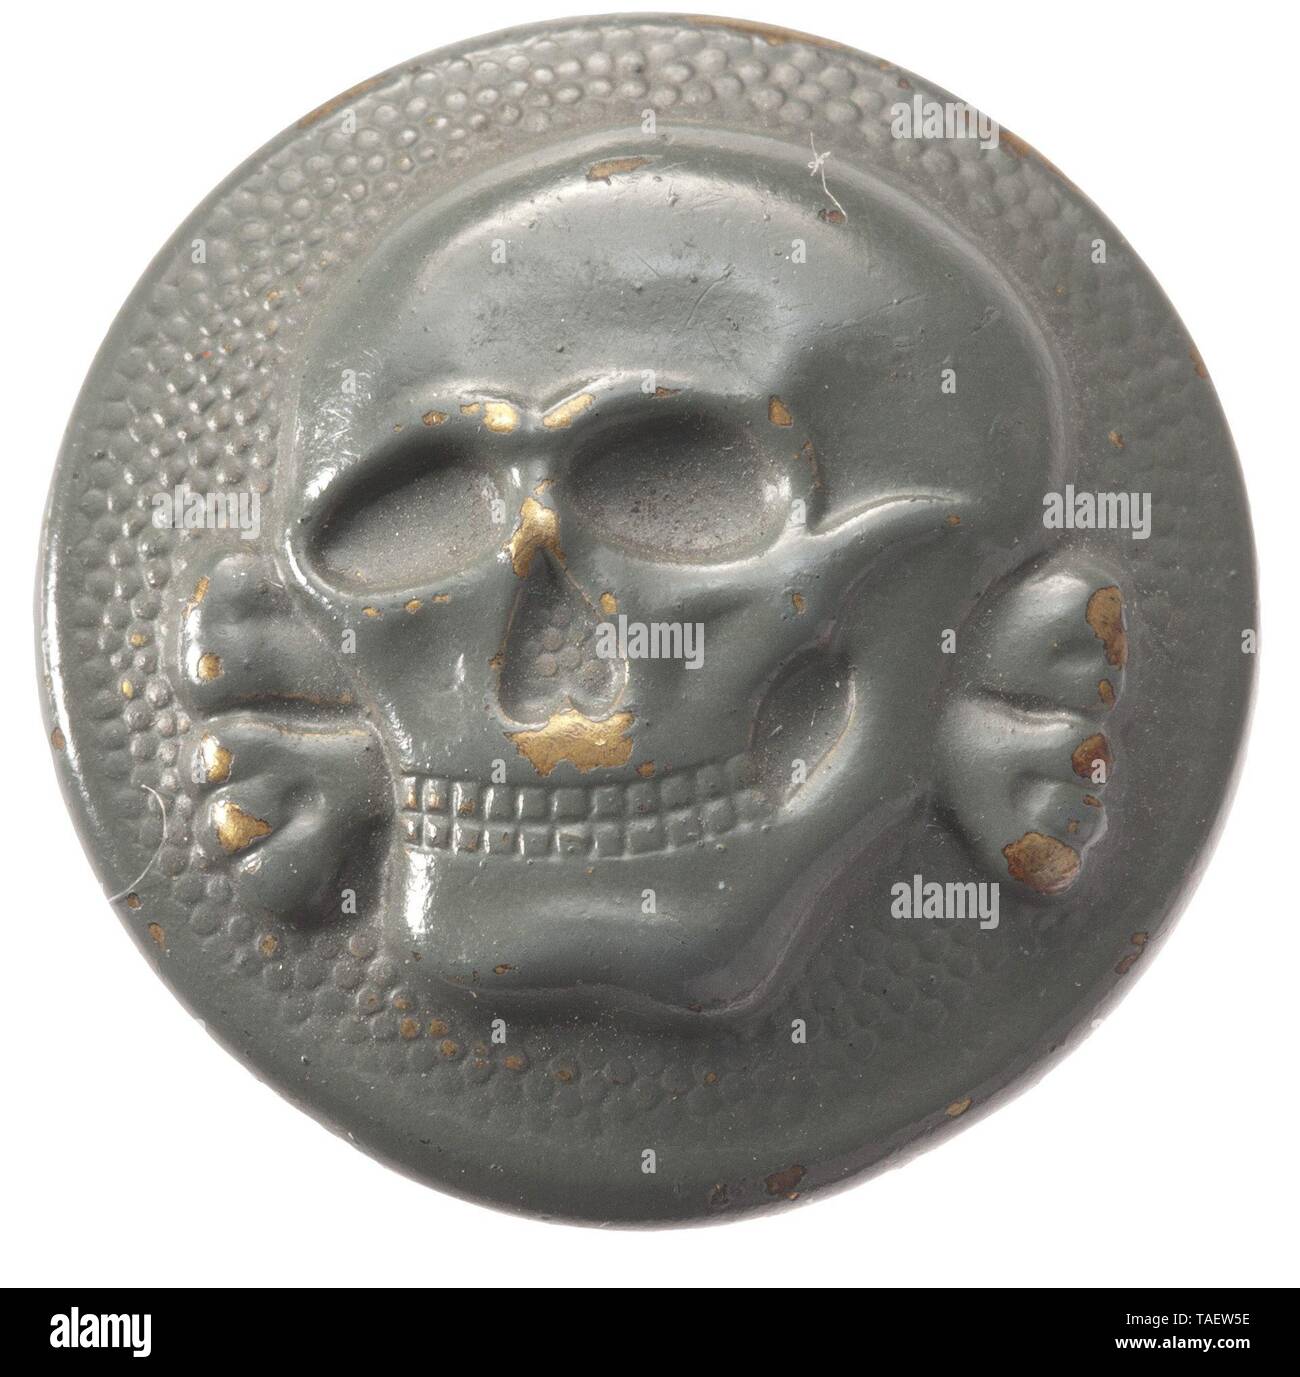 An SS cap button with death's head for the field cap Buntmetall, feldgrau lackiert (berieben). Reliefierter Totenkopf auf gekörntem Grund. Rs. der Herstellerstempel 'RZM M5/8'. Trage- und Altersspuren. Durchmesser 20 mm. historic, historical, 20th century, 1930s, 1940s, Waffen-SS, armed division of the SS, armed service, armed services, NS, National Socialism, Nazism, Third Reich, German Reich, Germany, military, militaria, utensil, piece of equipment, utensils, object, objects, stills, clipping, clippings, cut out, cut-out, cut-outs, fascism, fascistic, National Socialist,, Editorial-Use-Only Stock Photo